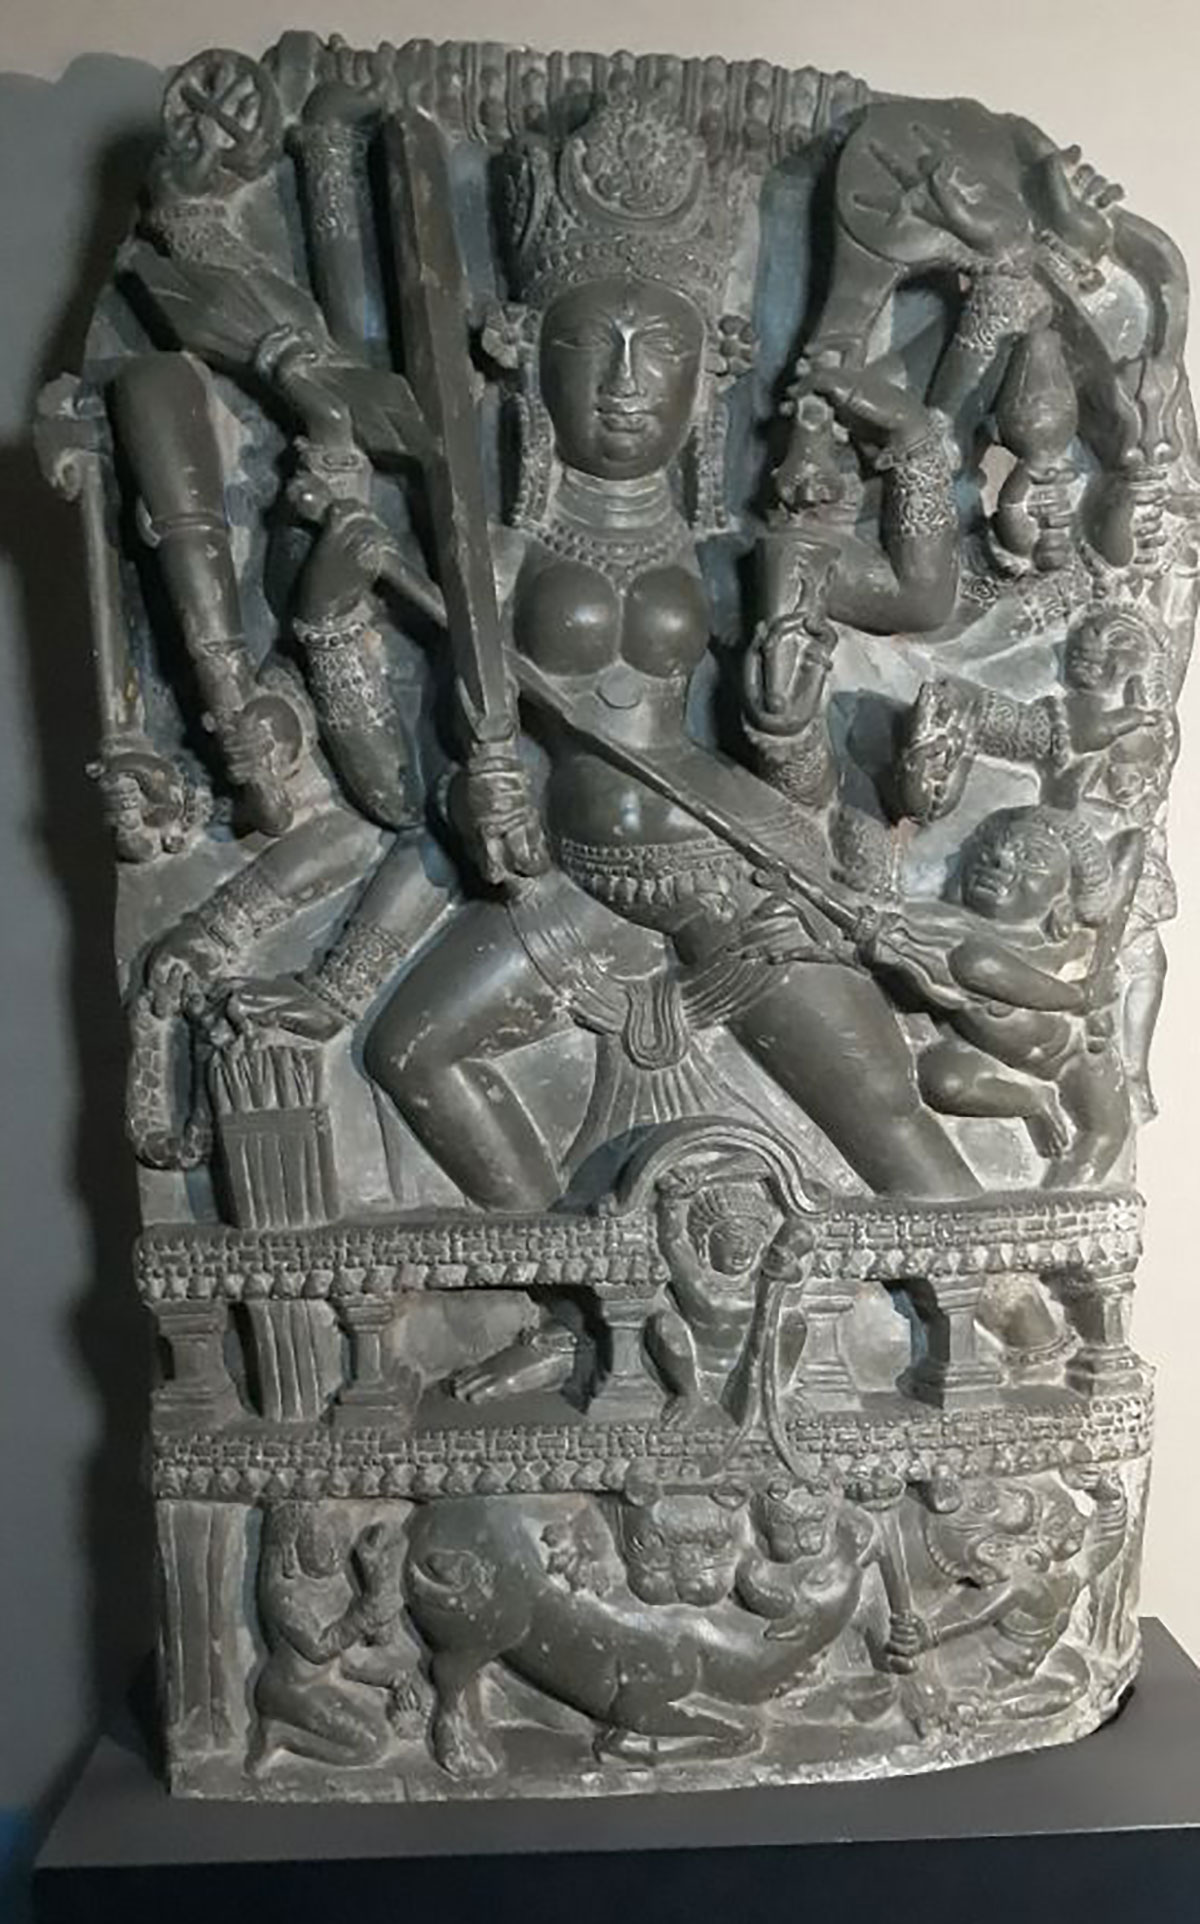 Durga-statue-smuggled-out-of-Kashmir-and-recovered-from-Germany.